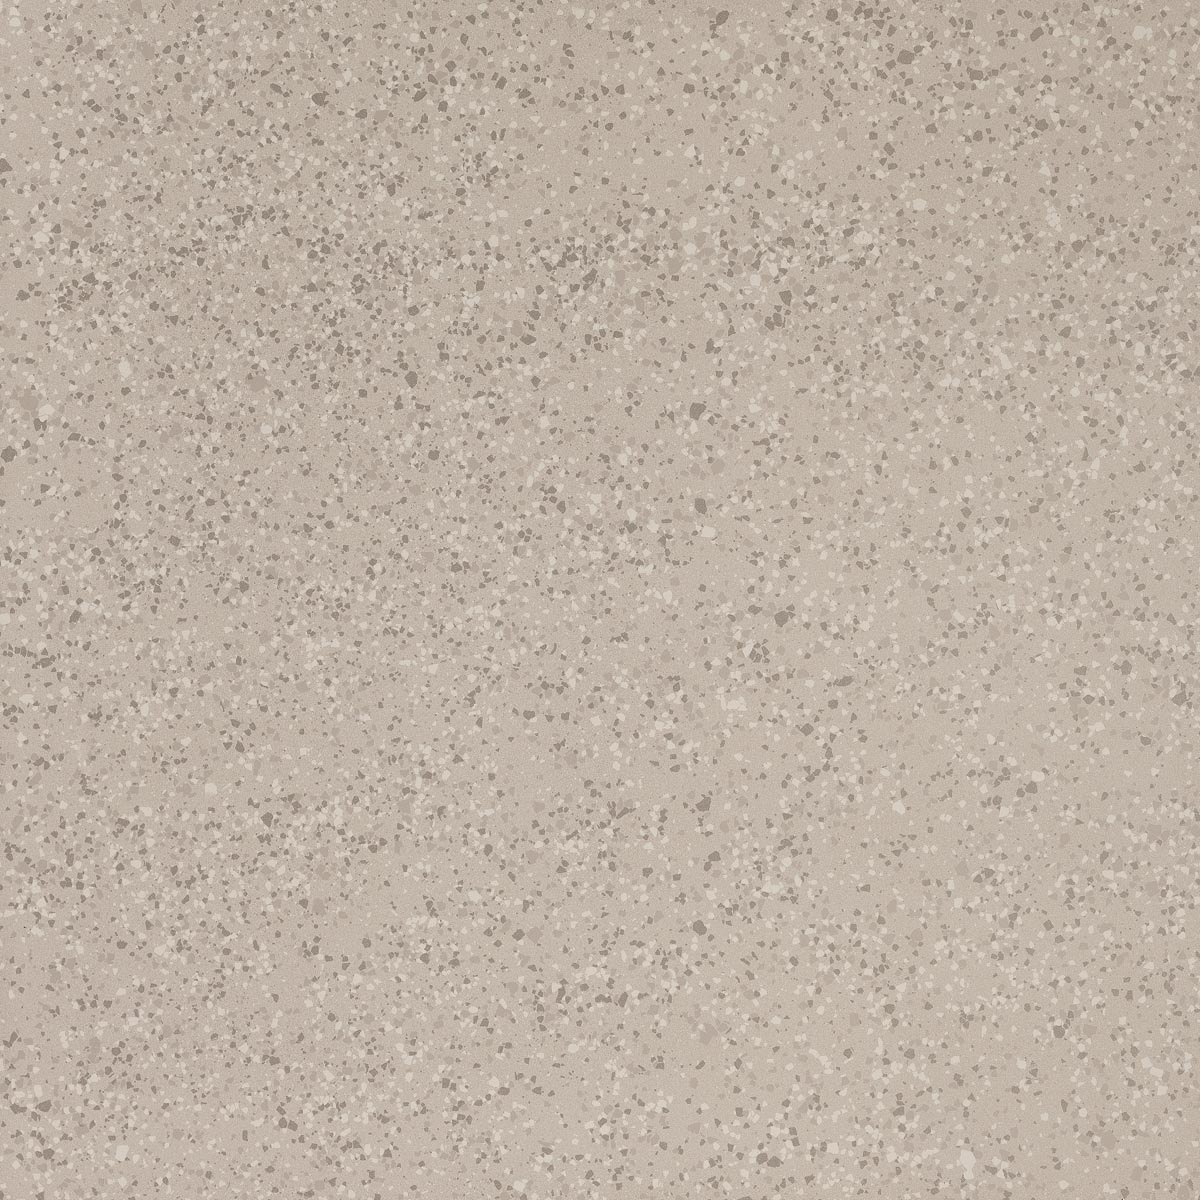 Imola Parade Argento Natural Flat Matt 166070 120x120cm rectified 10,5mm - PRDE 120AG RM